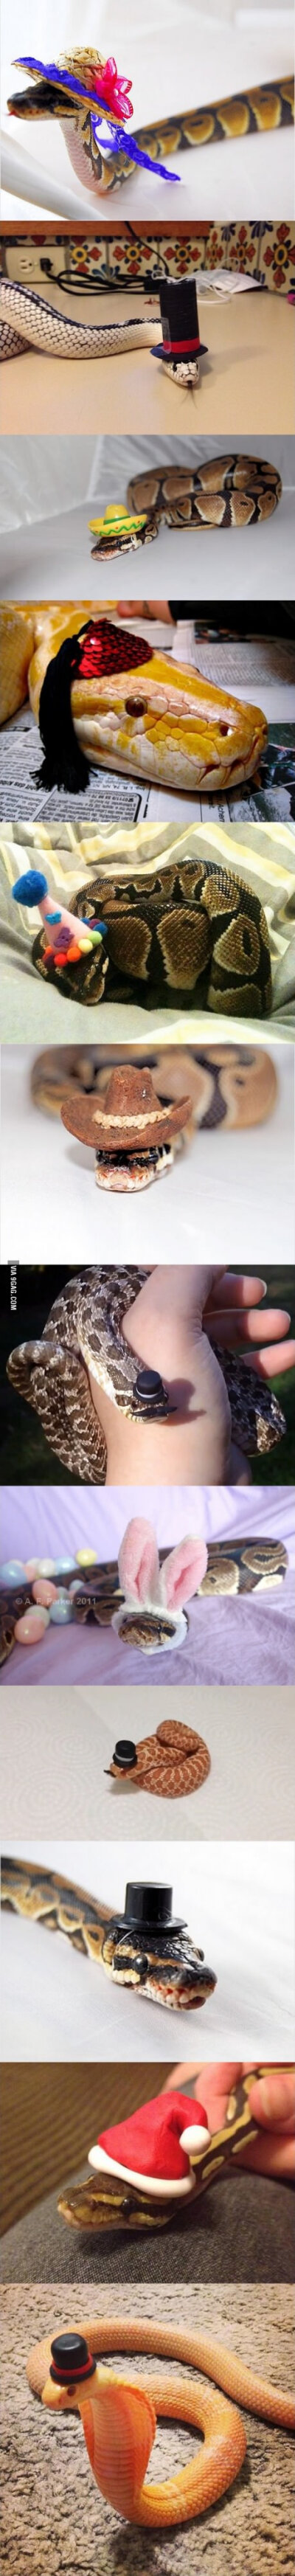 Snakes wearing hats